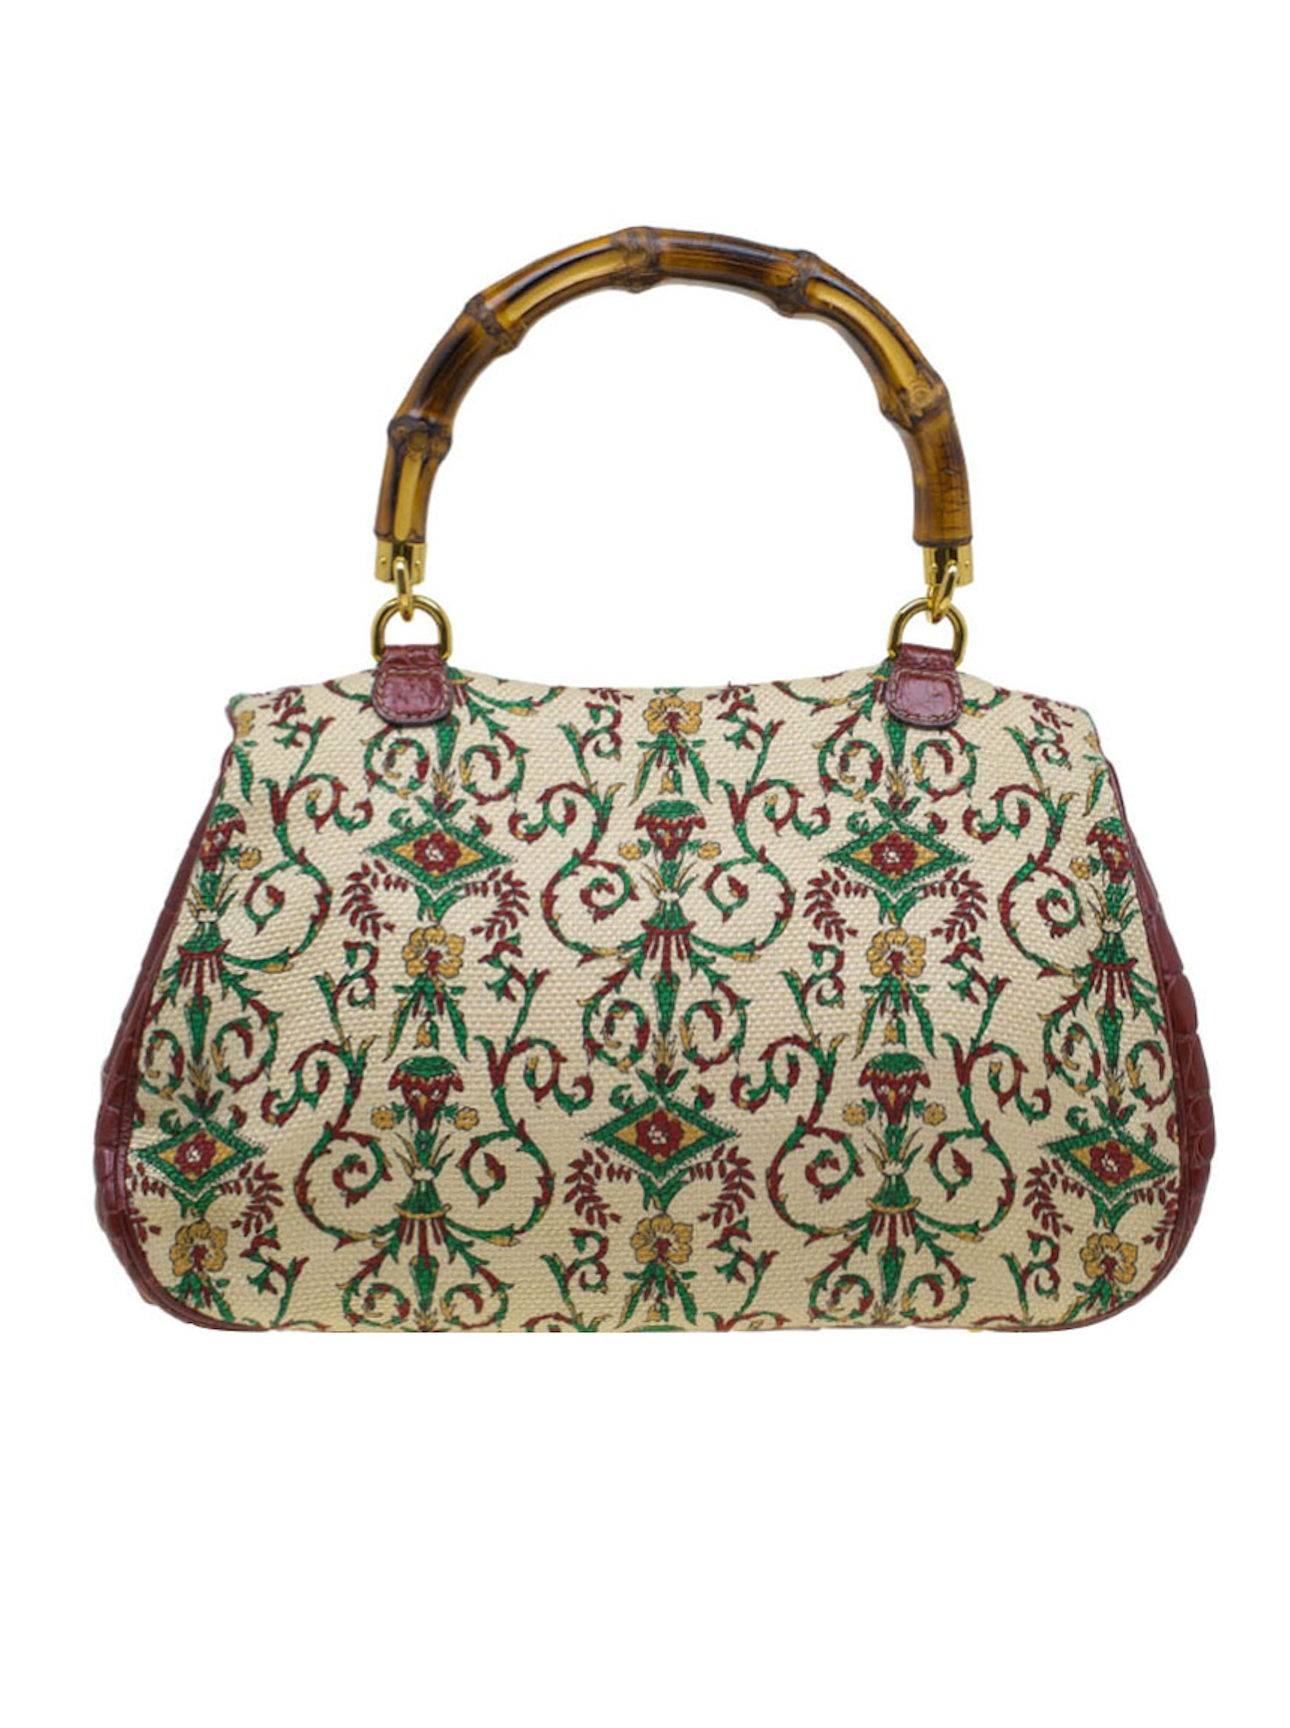 
Gucci Heritage is a one-of-a-kind accessories collection which pays tribute to the Italian brand’s rich history. Relying on Gucci’s skilled artisan techniques and its incomparable luxury goods expertise.

This bag from the Heritage collection was